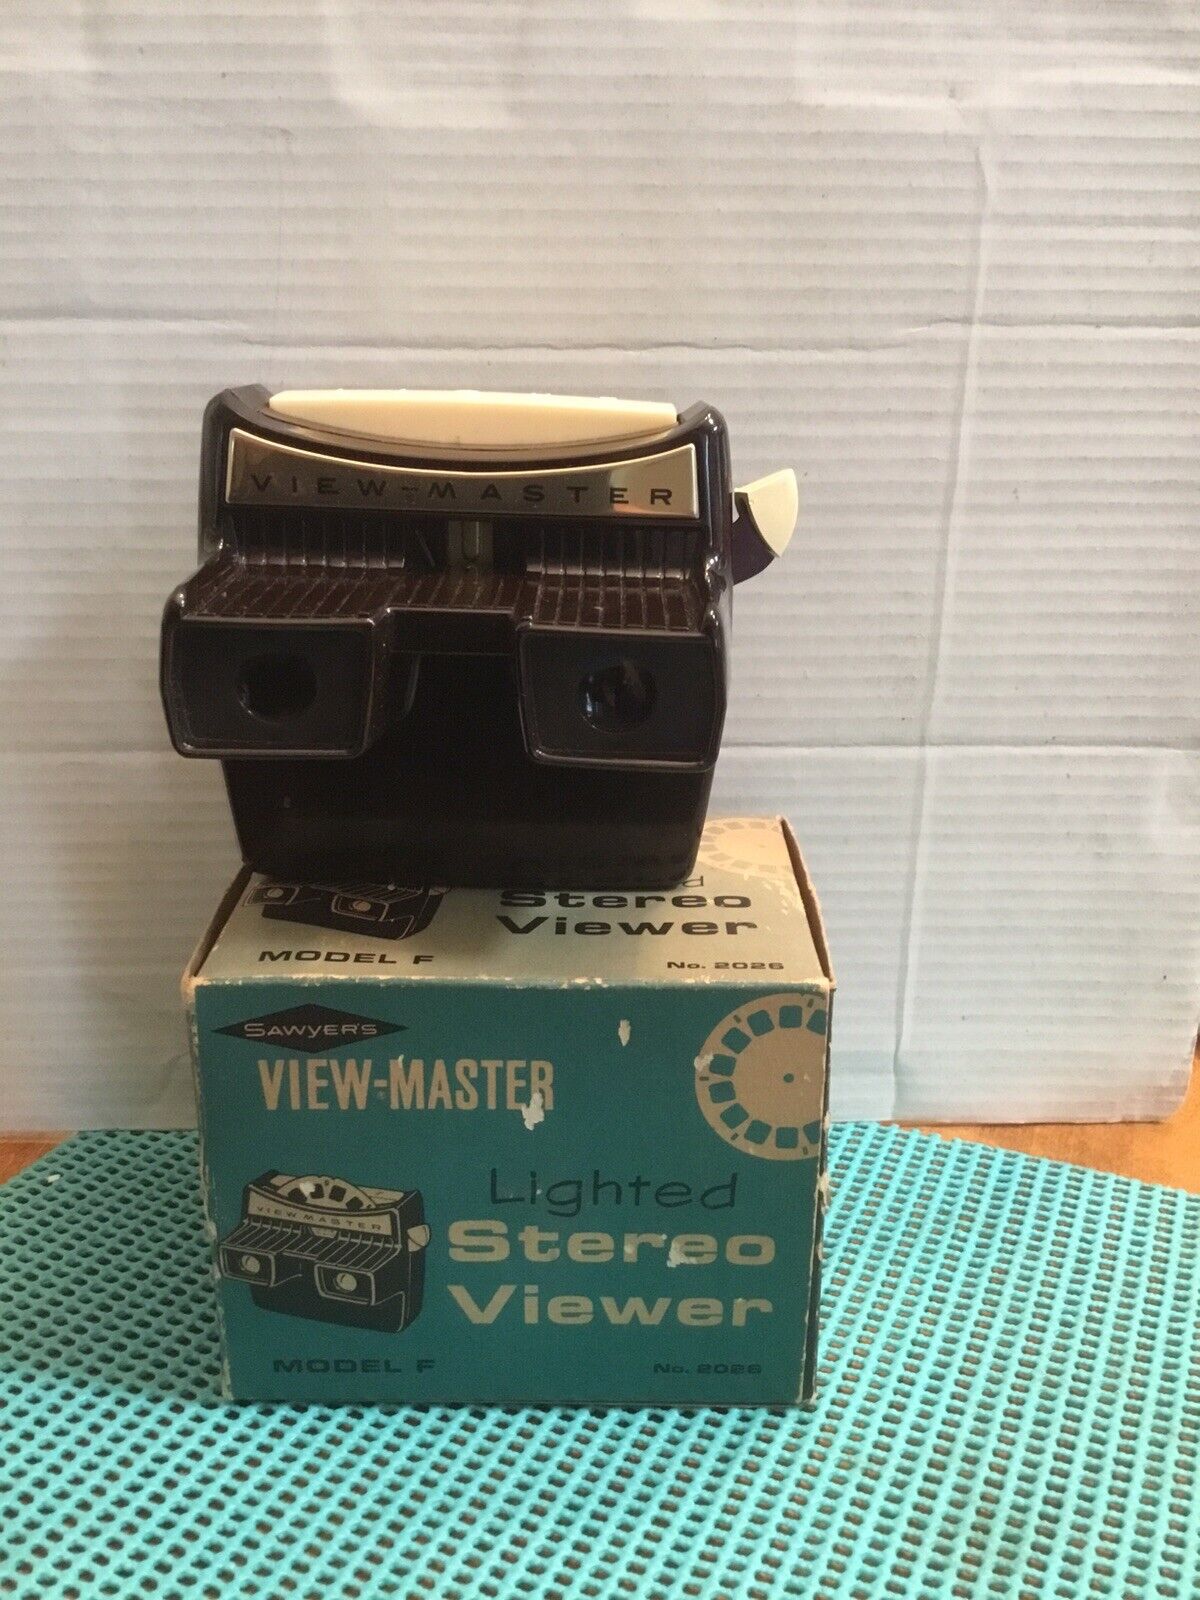 Old Rare Vintage Sawyer\'s View Master Lighted Stereo Viewer Model F No. 2026